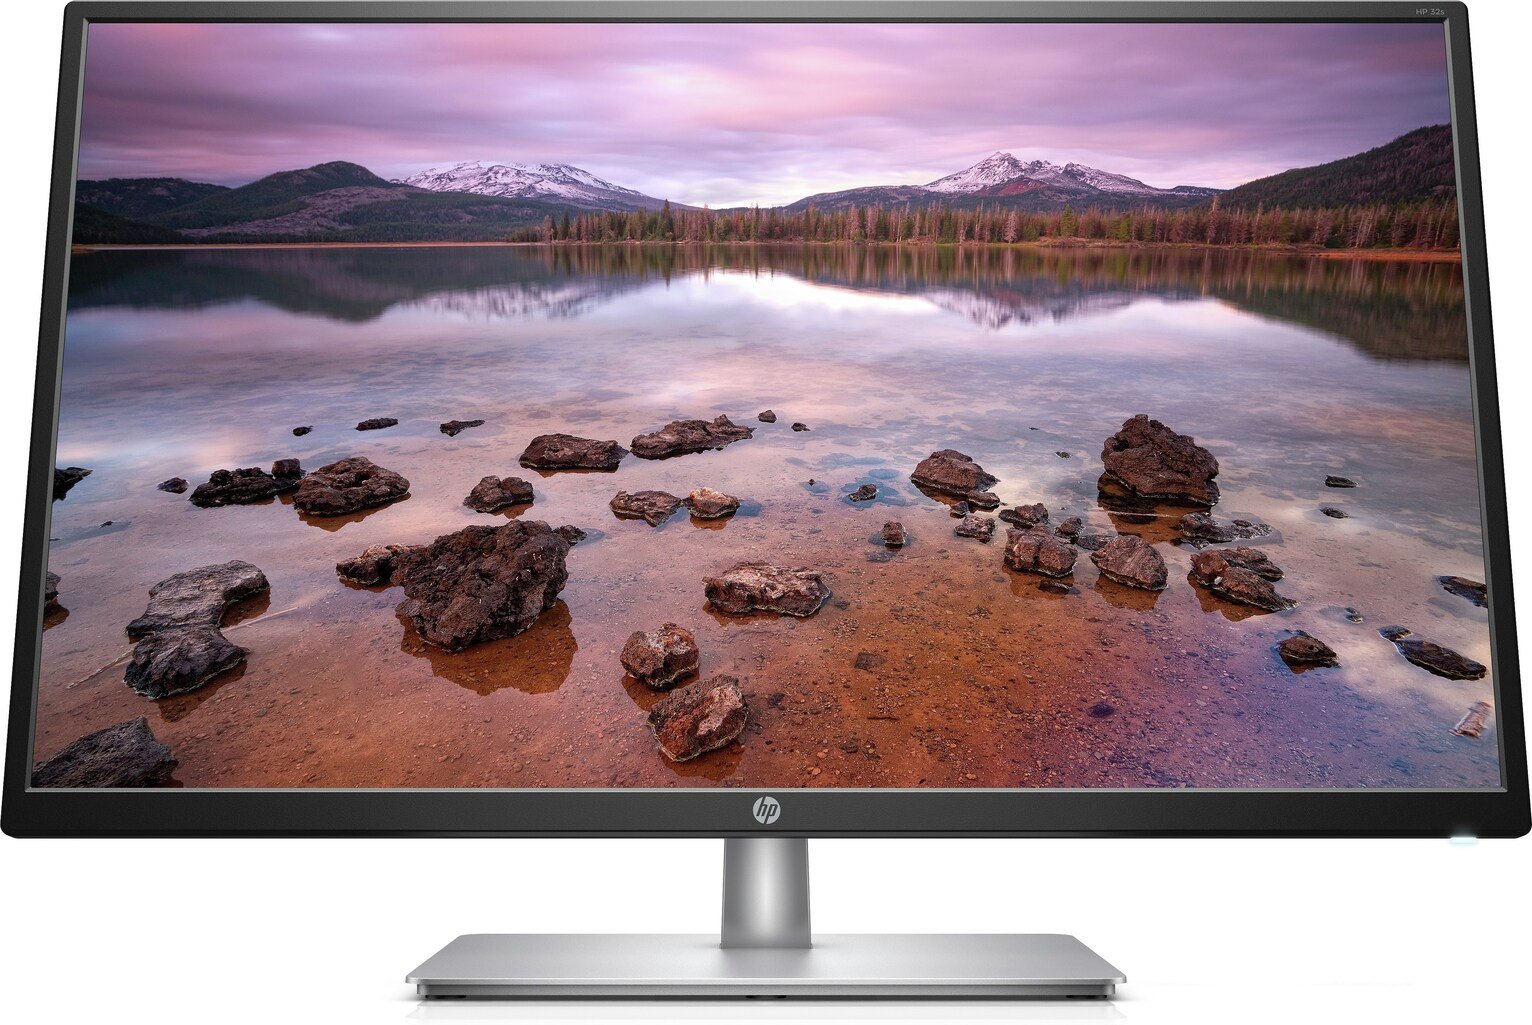 HP 32s 31.5in FHD IPS Monitor Review